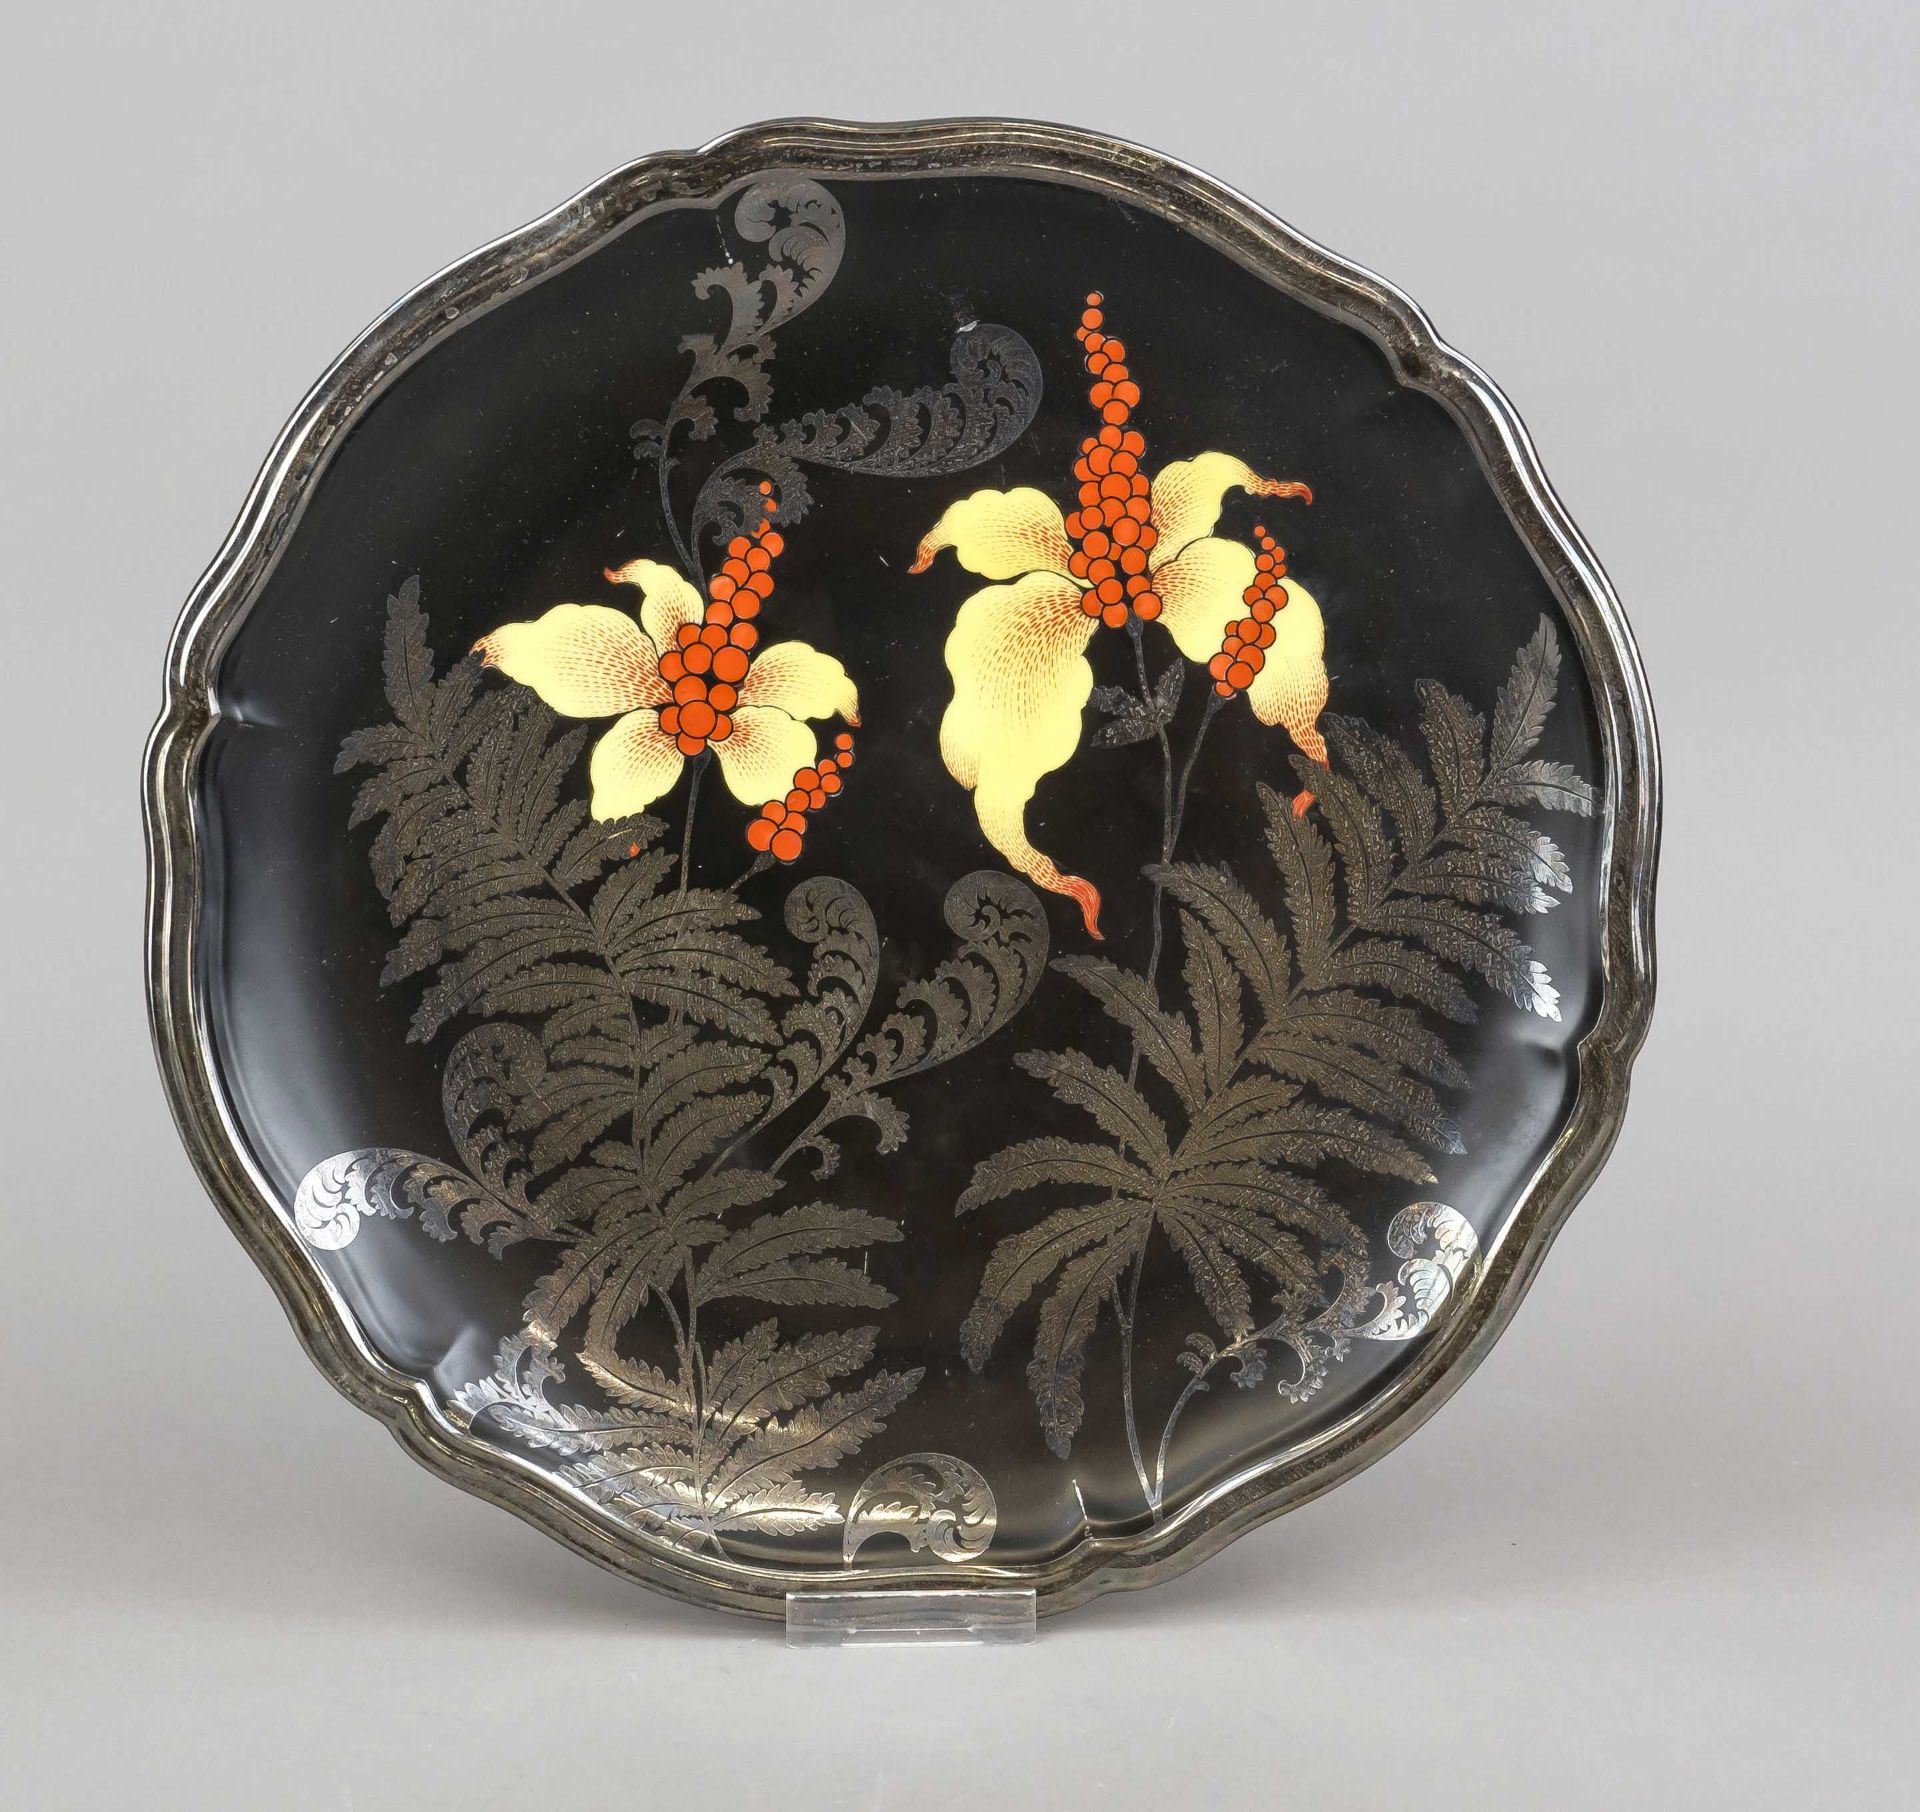 Round bowl, Rosenthal, mark 1938-1956, Chippendale shape, flower painting on black ground, silver